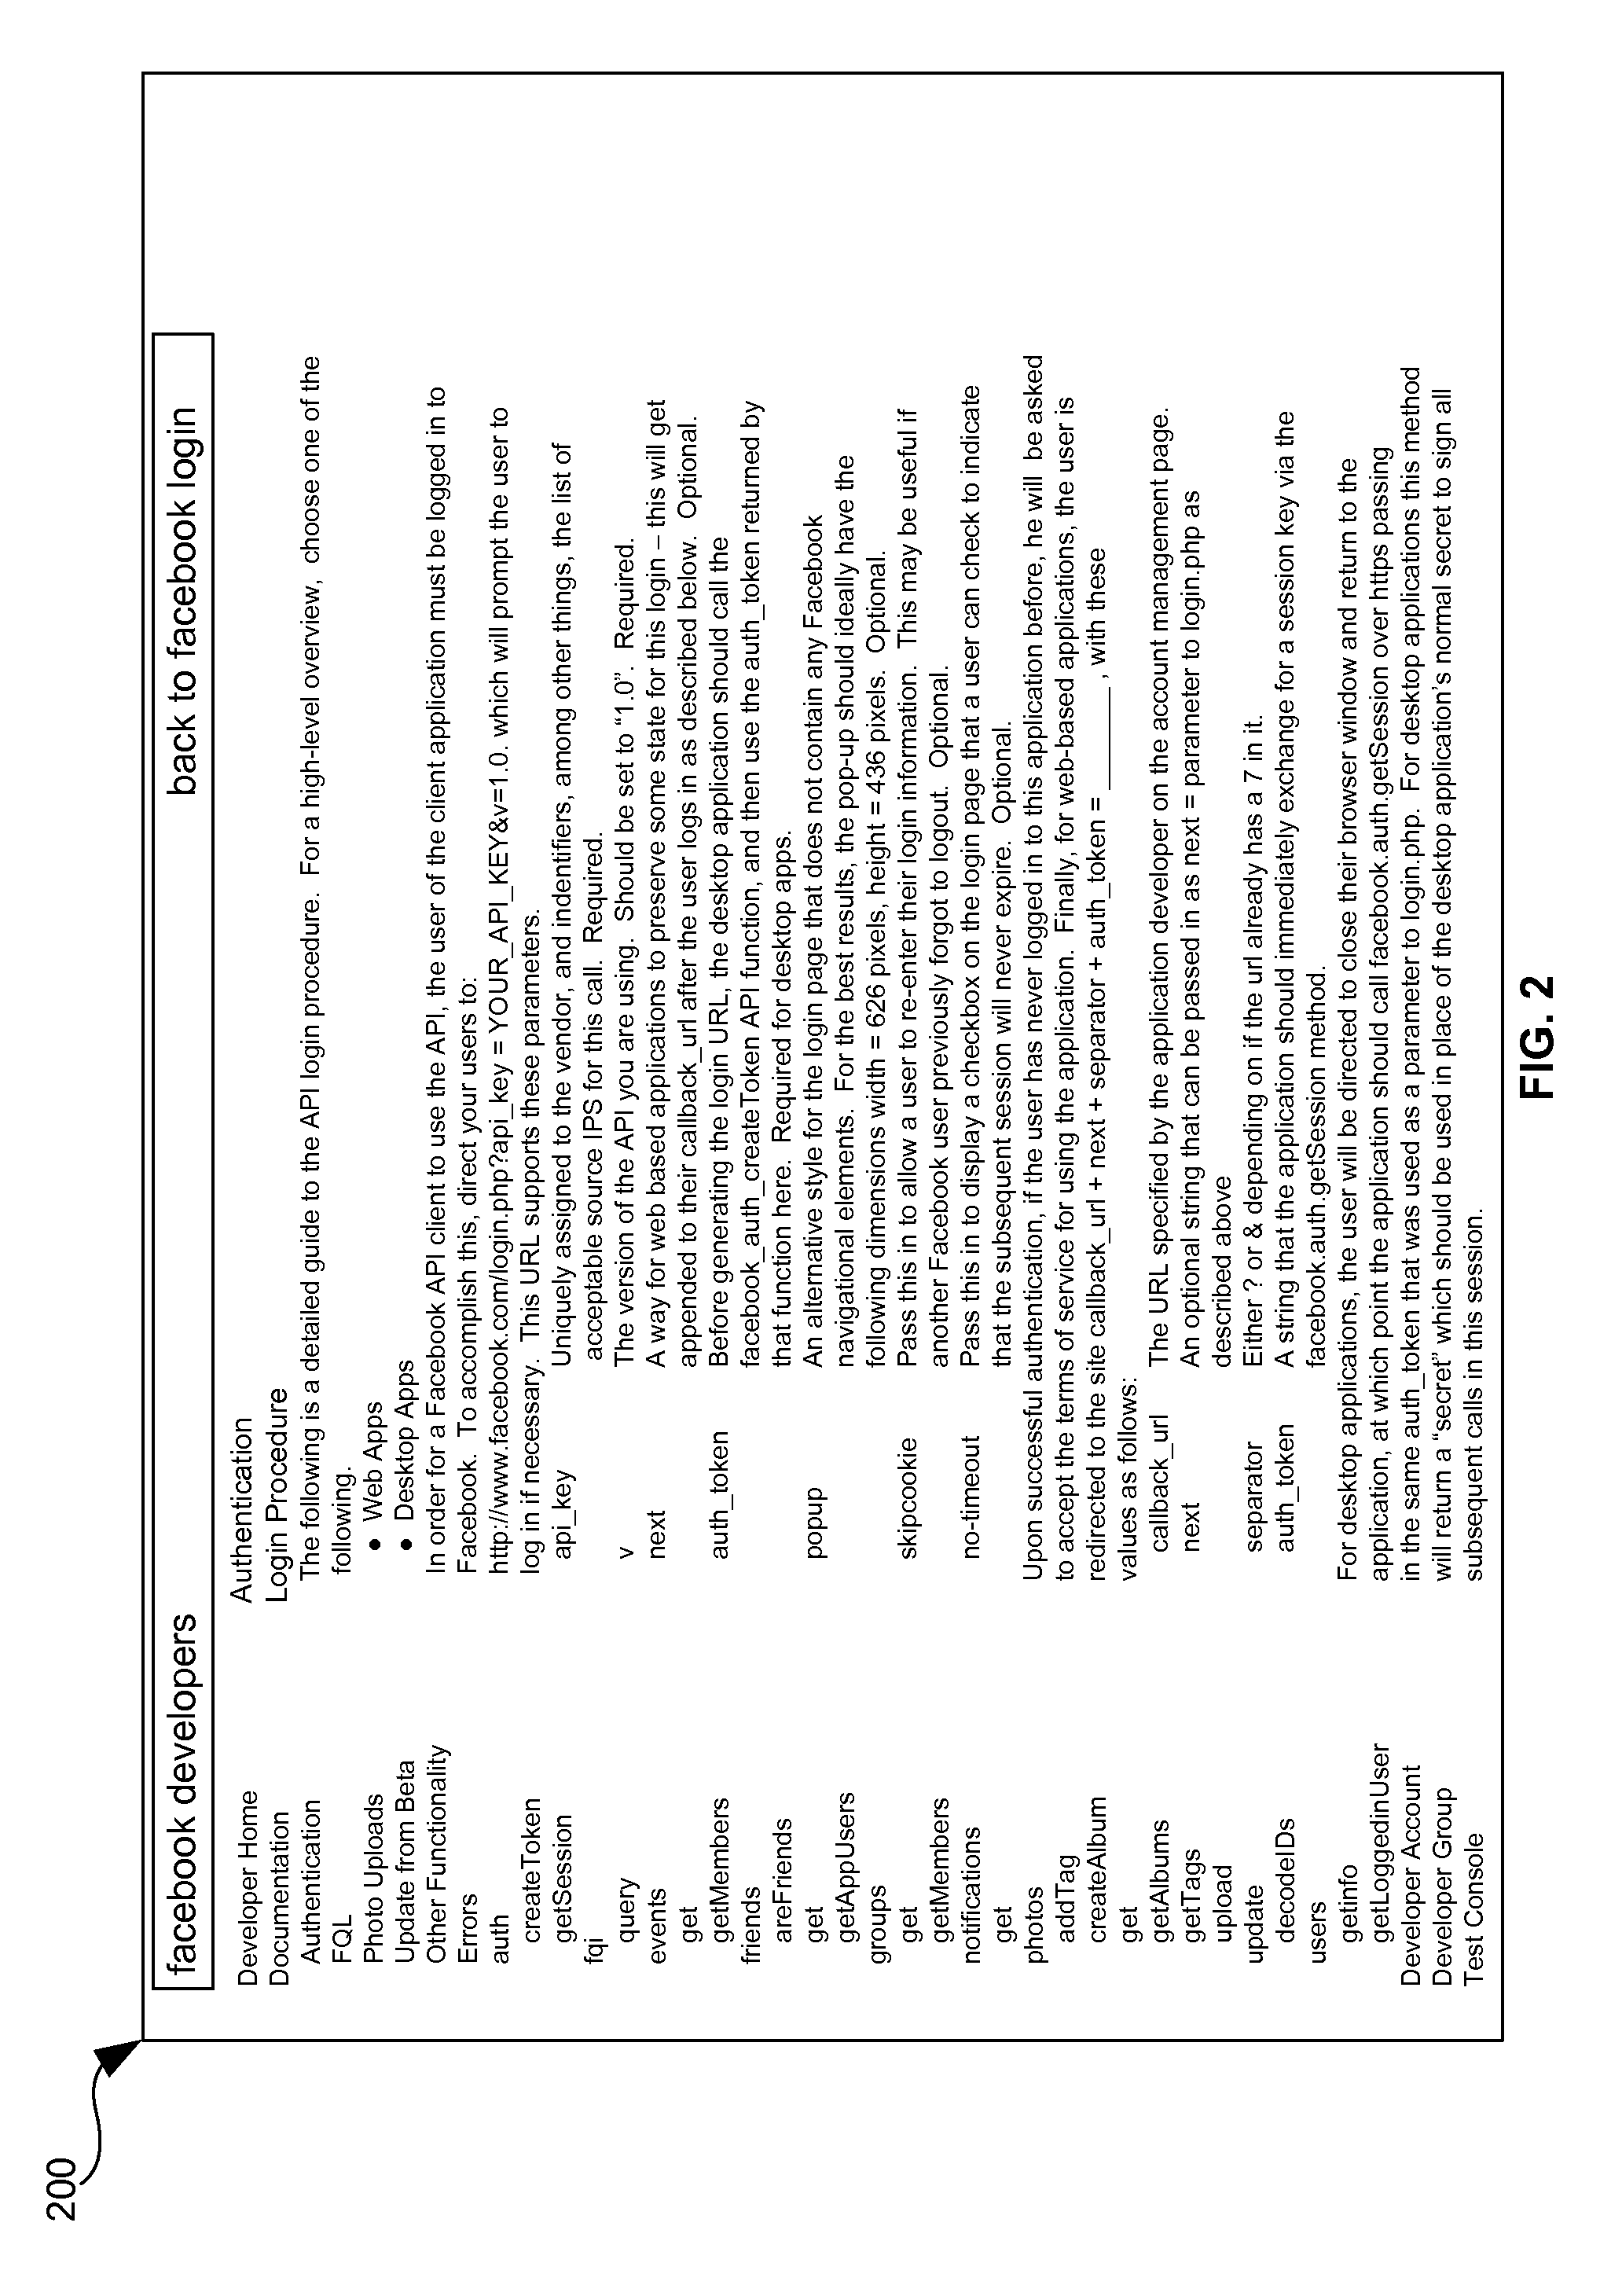 Network authentication for accessing social networking system information by a third party application